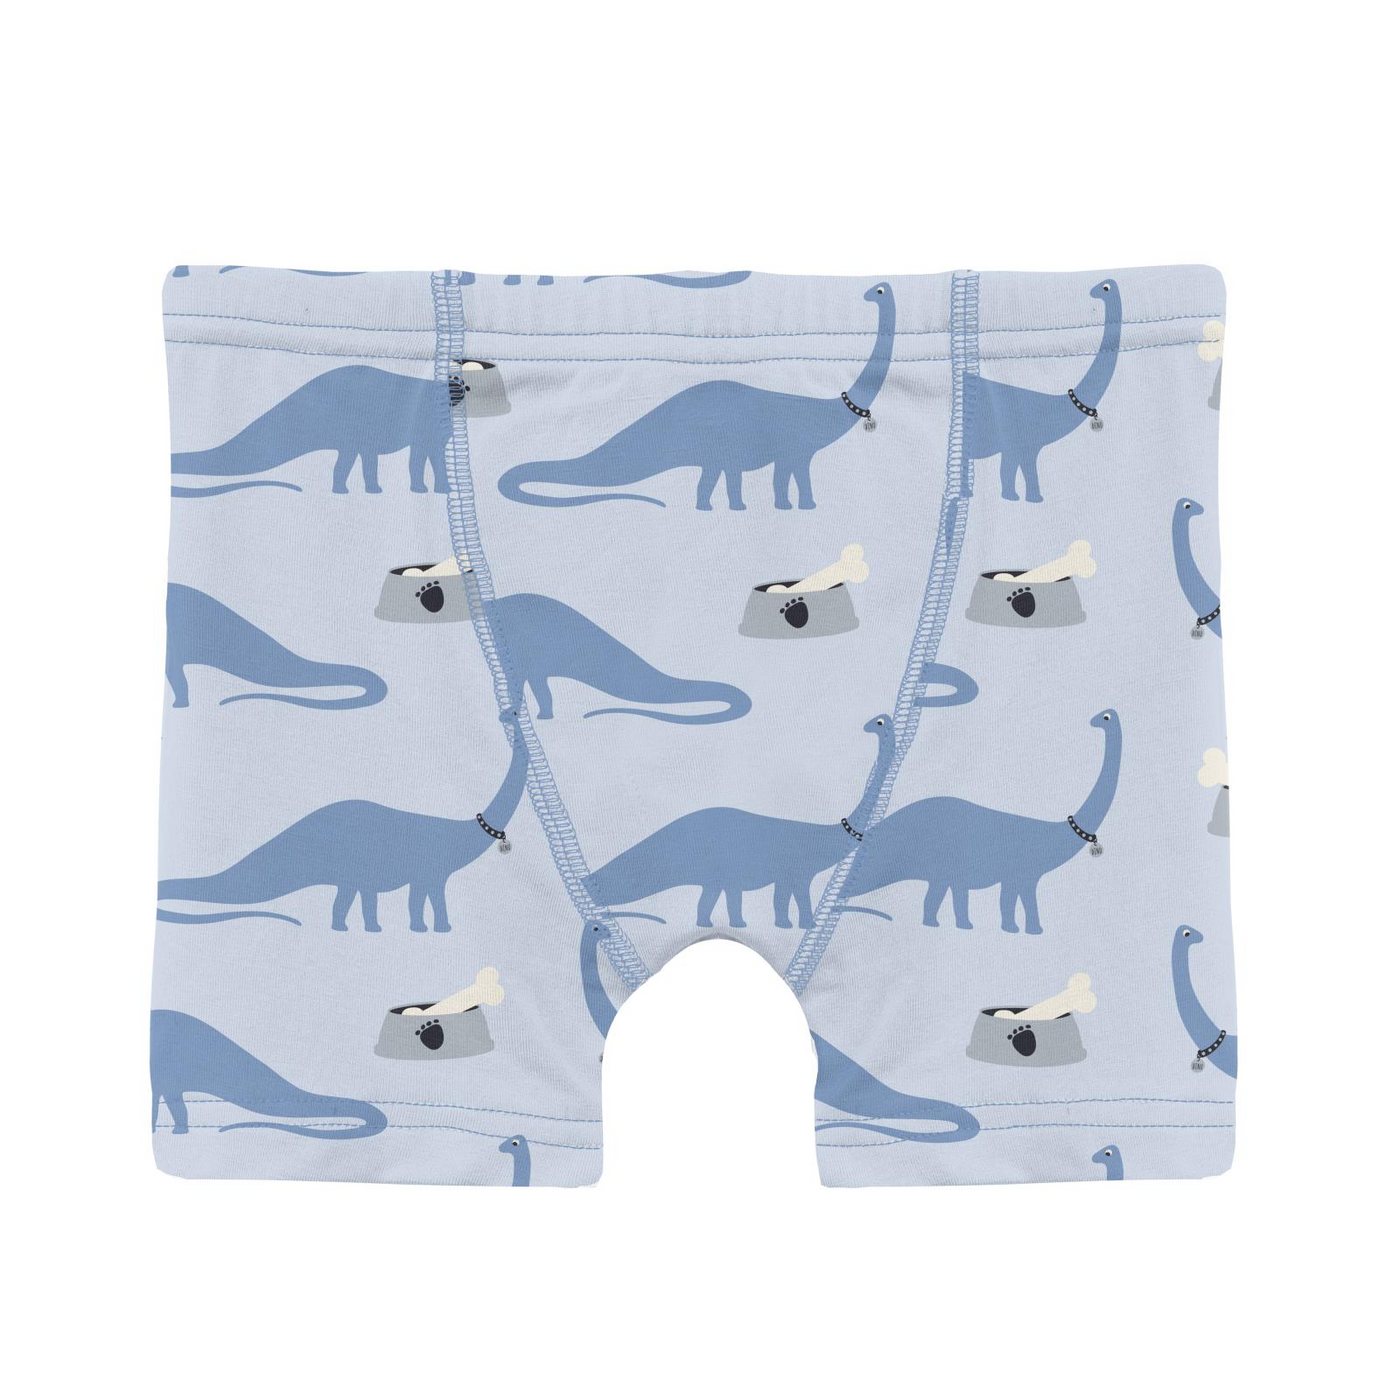 Kickee Pants Boxer Brief Set of 3: Pearl Blue Itsy Bitsy Spider, Solid Deep Space & Dew Pet Dino